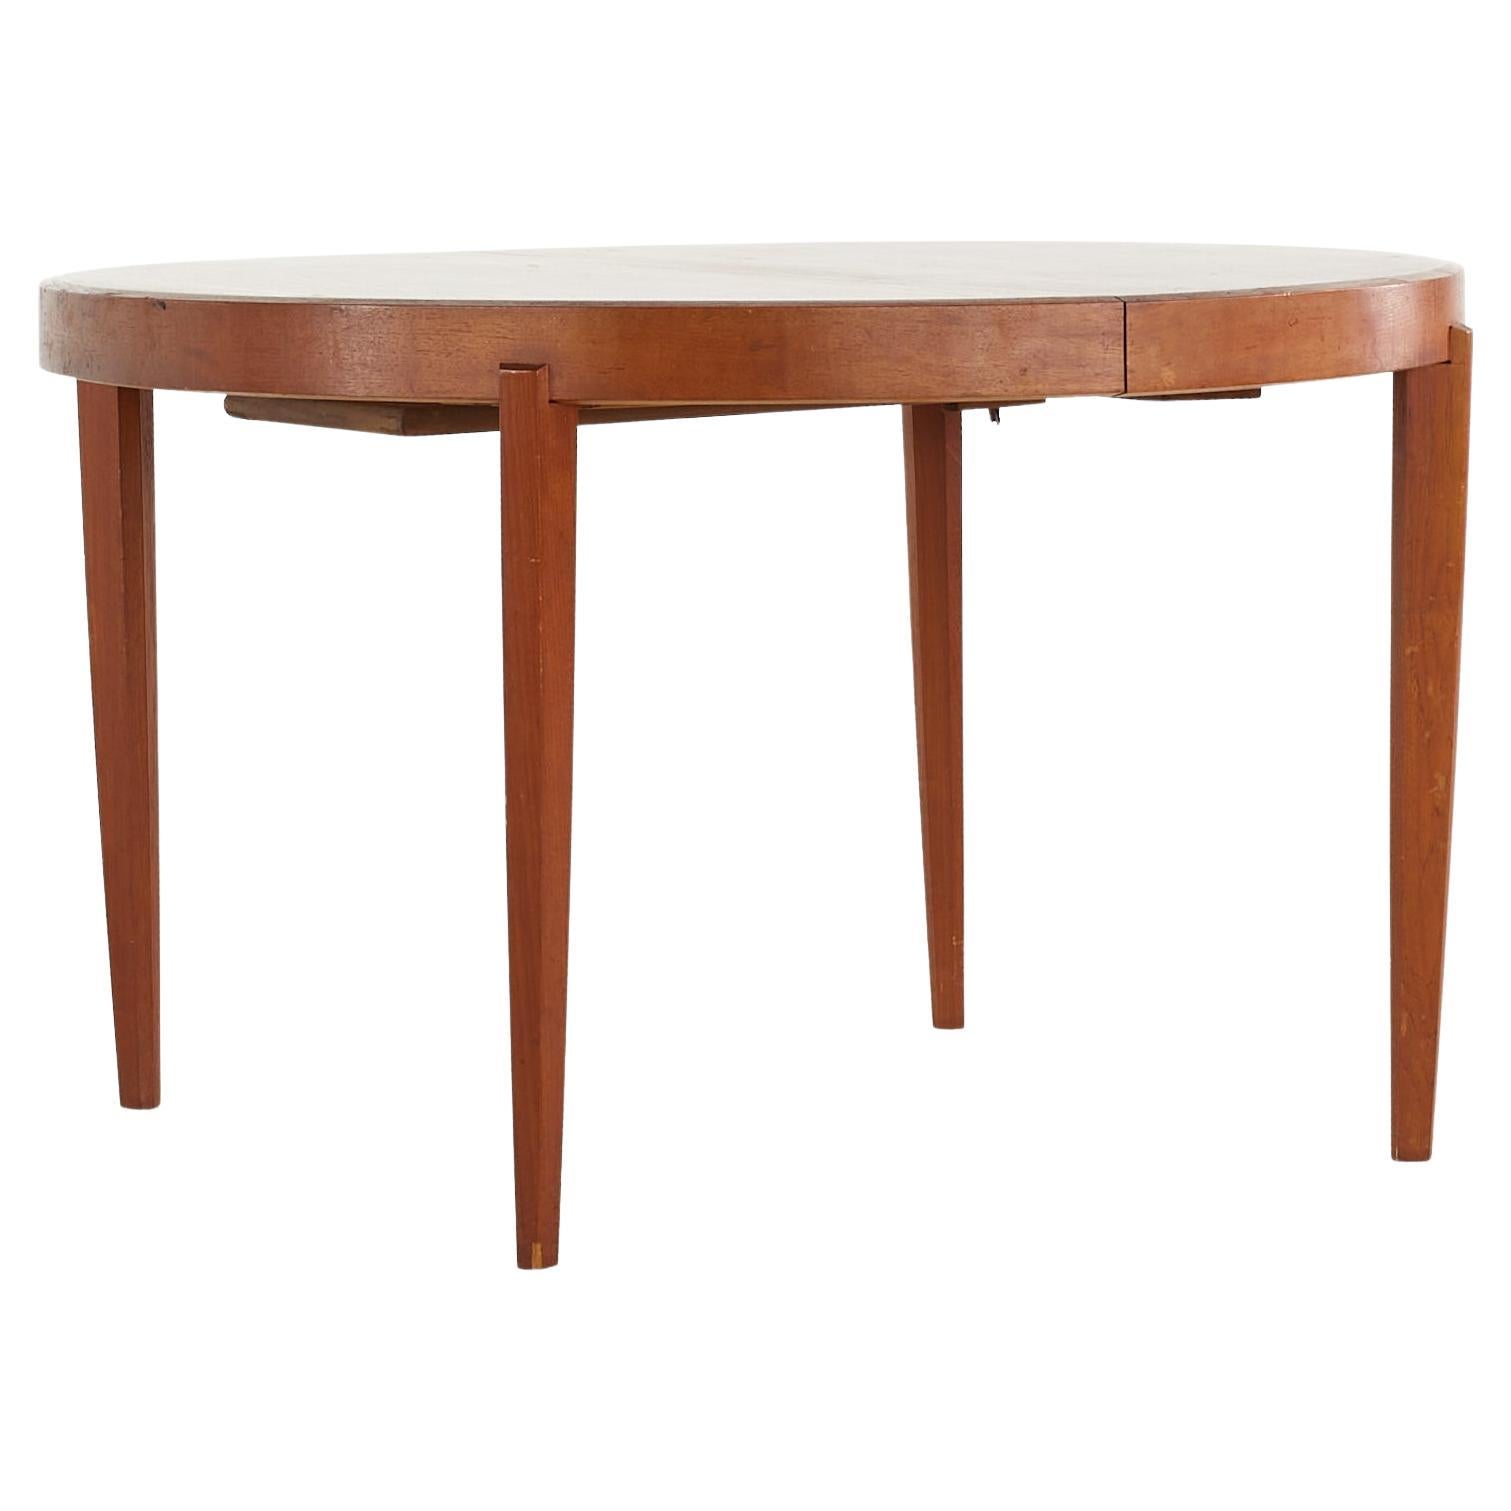 Johannes Andersen Style Mid-Century Teak Expanding Dining Table with 4 Leaves